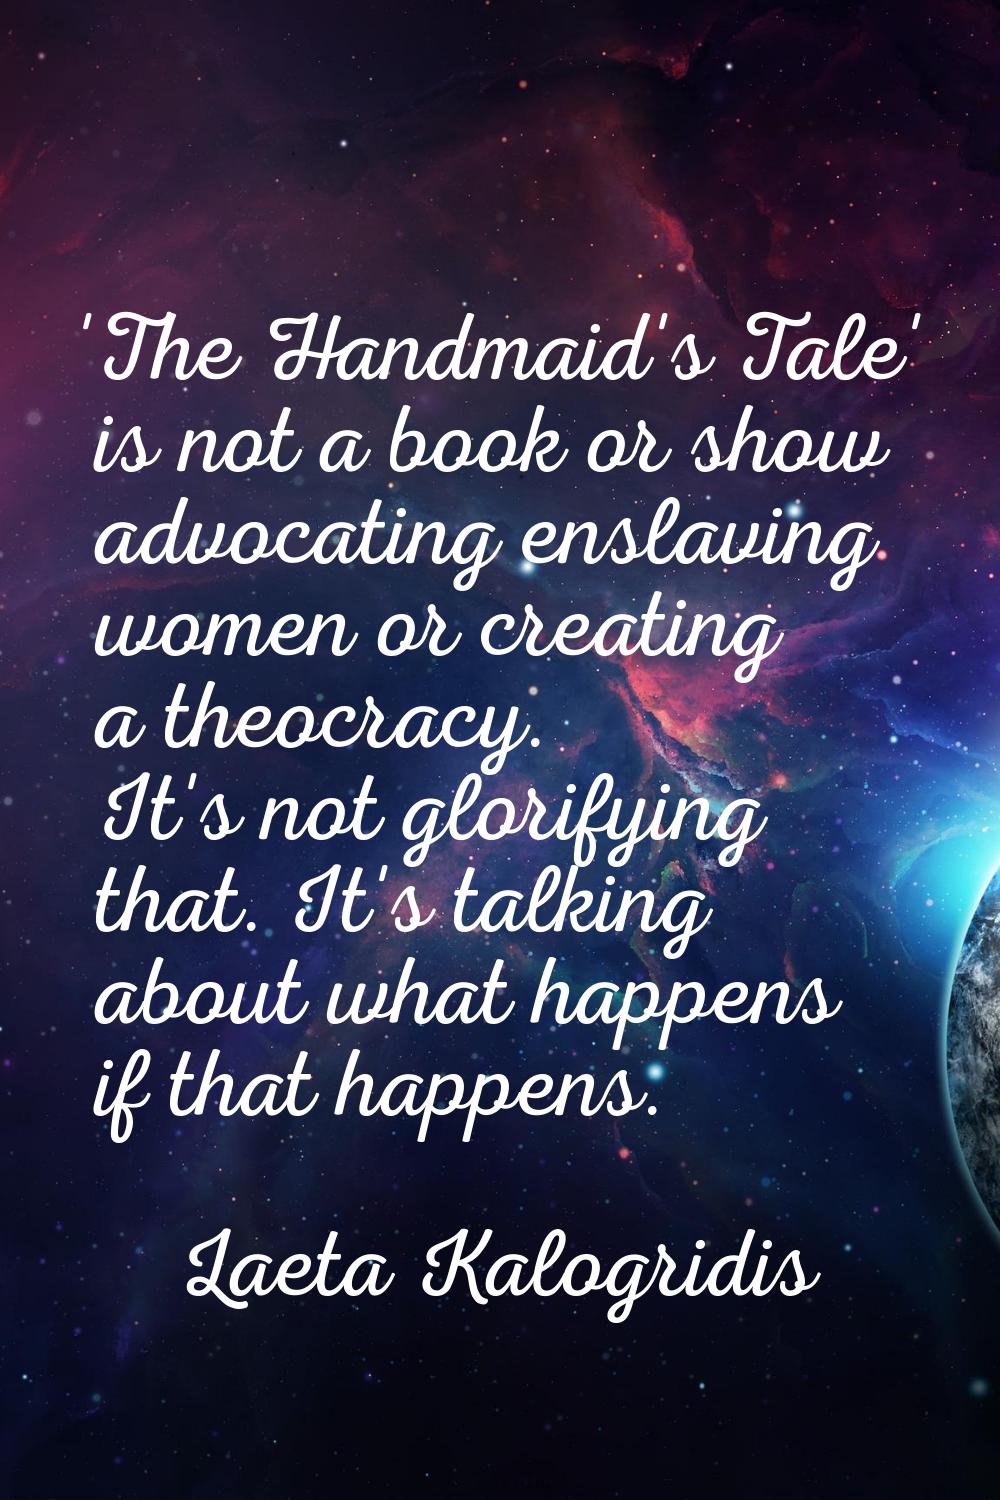 'The Handmaid's Tale' is not a book or show advocating enslaving women or creating a theocracy. It'